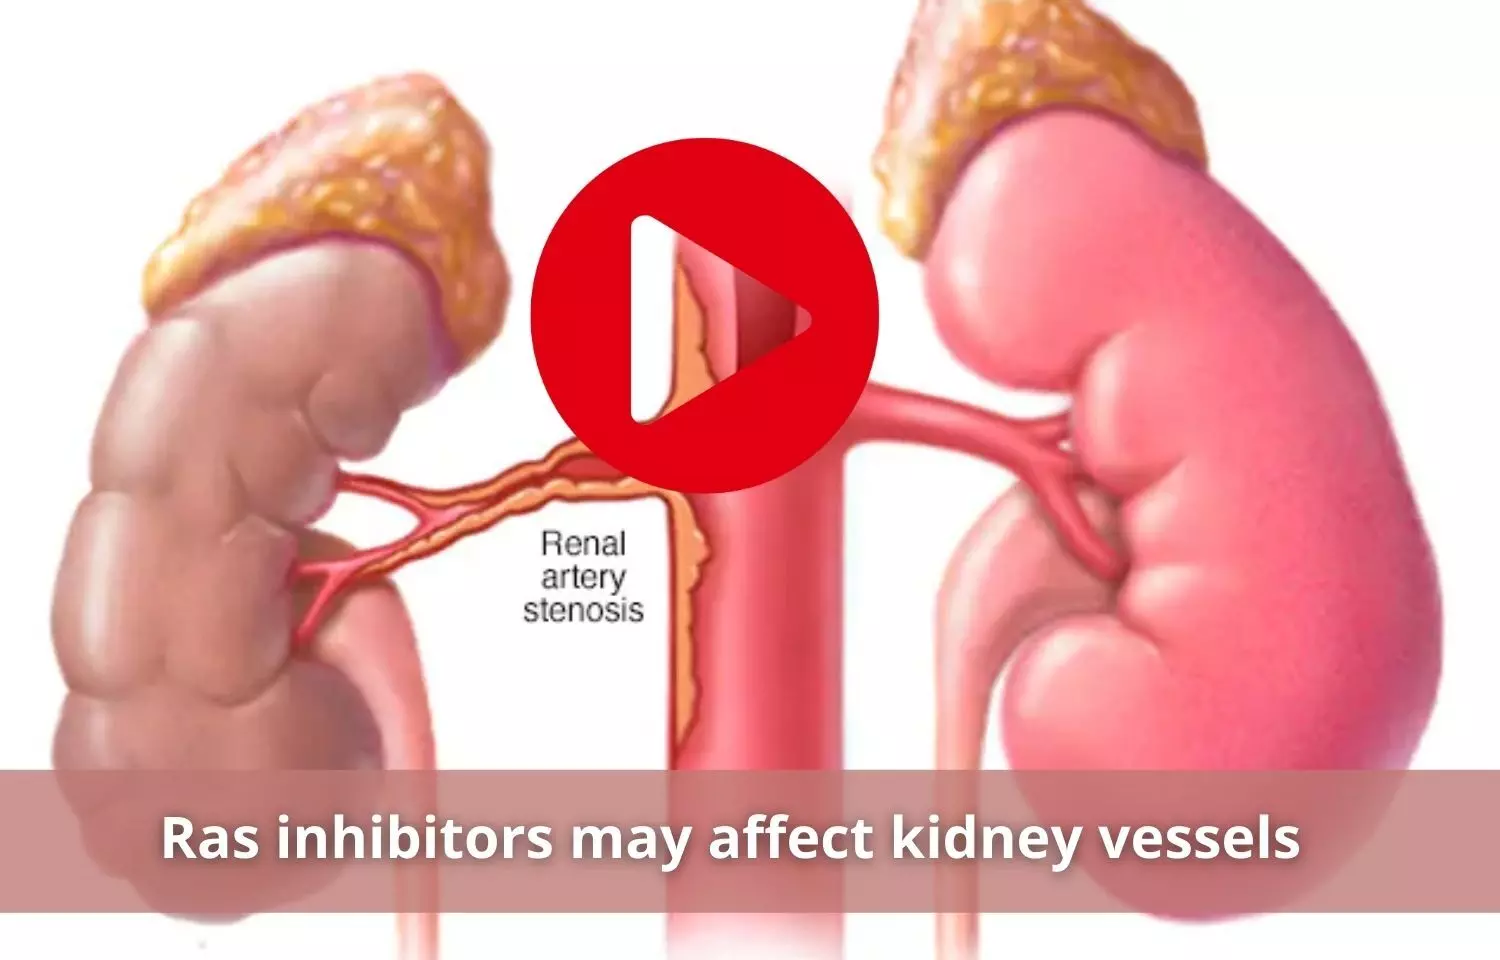 Ras inhibitors affects kidney vessels to greater extent